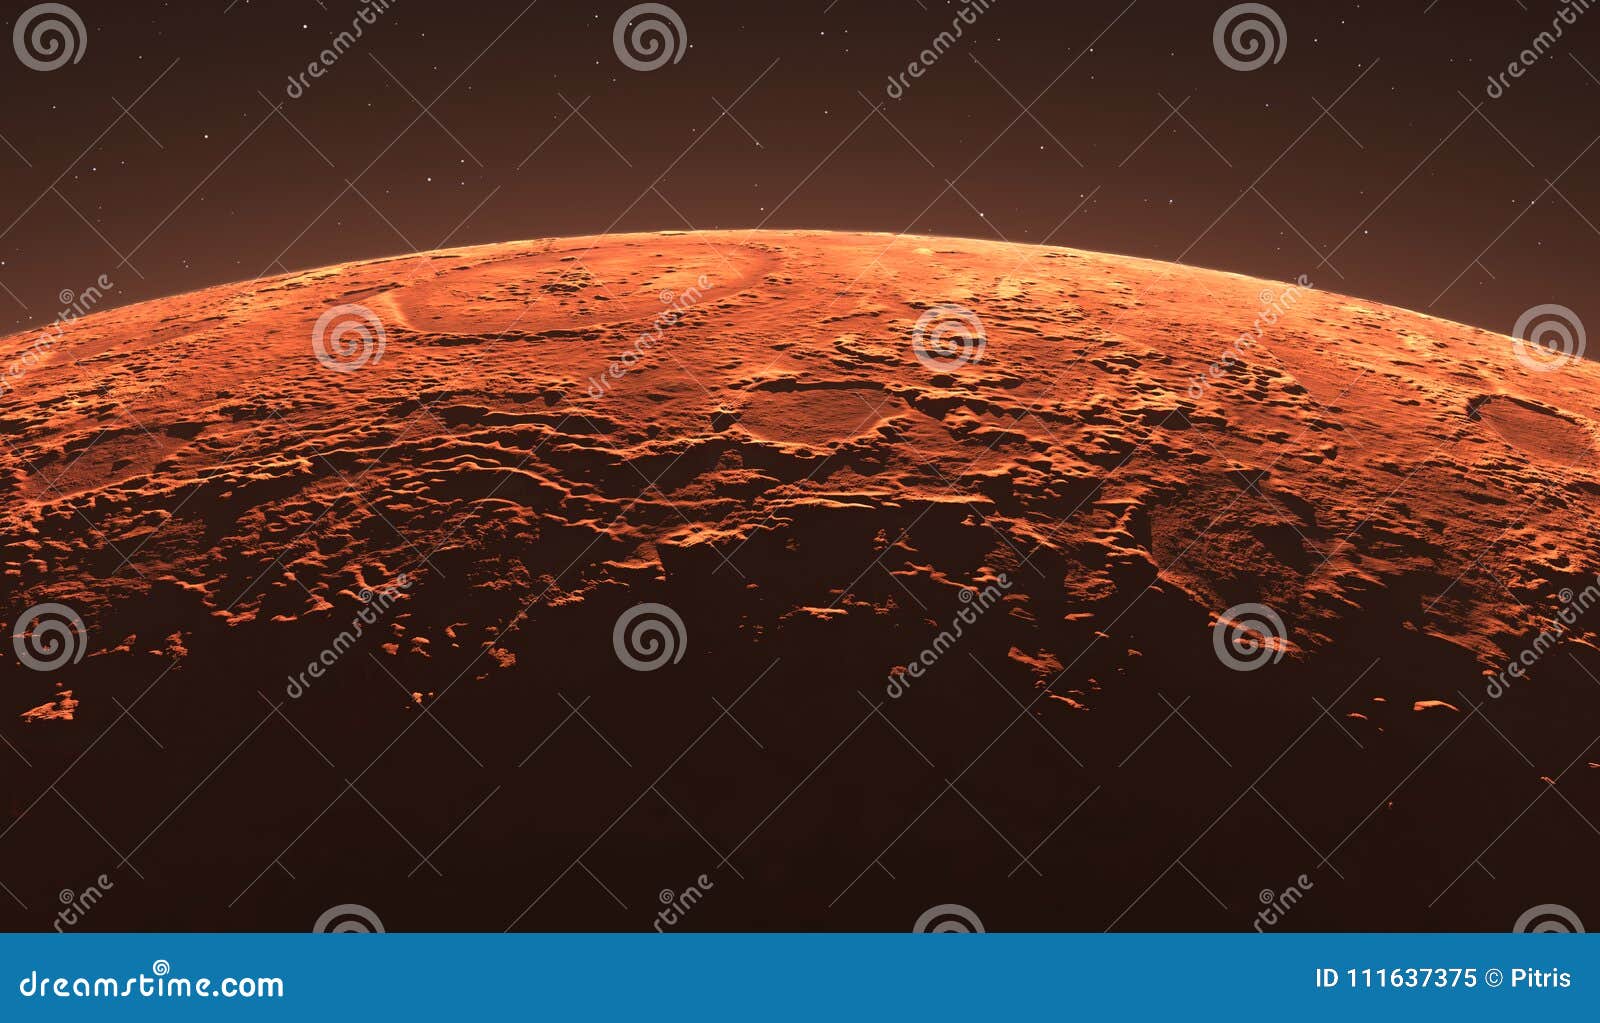 mars - the red planet. martian surface and dust in the atmosphere.